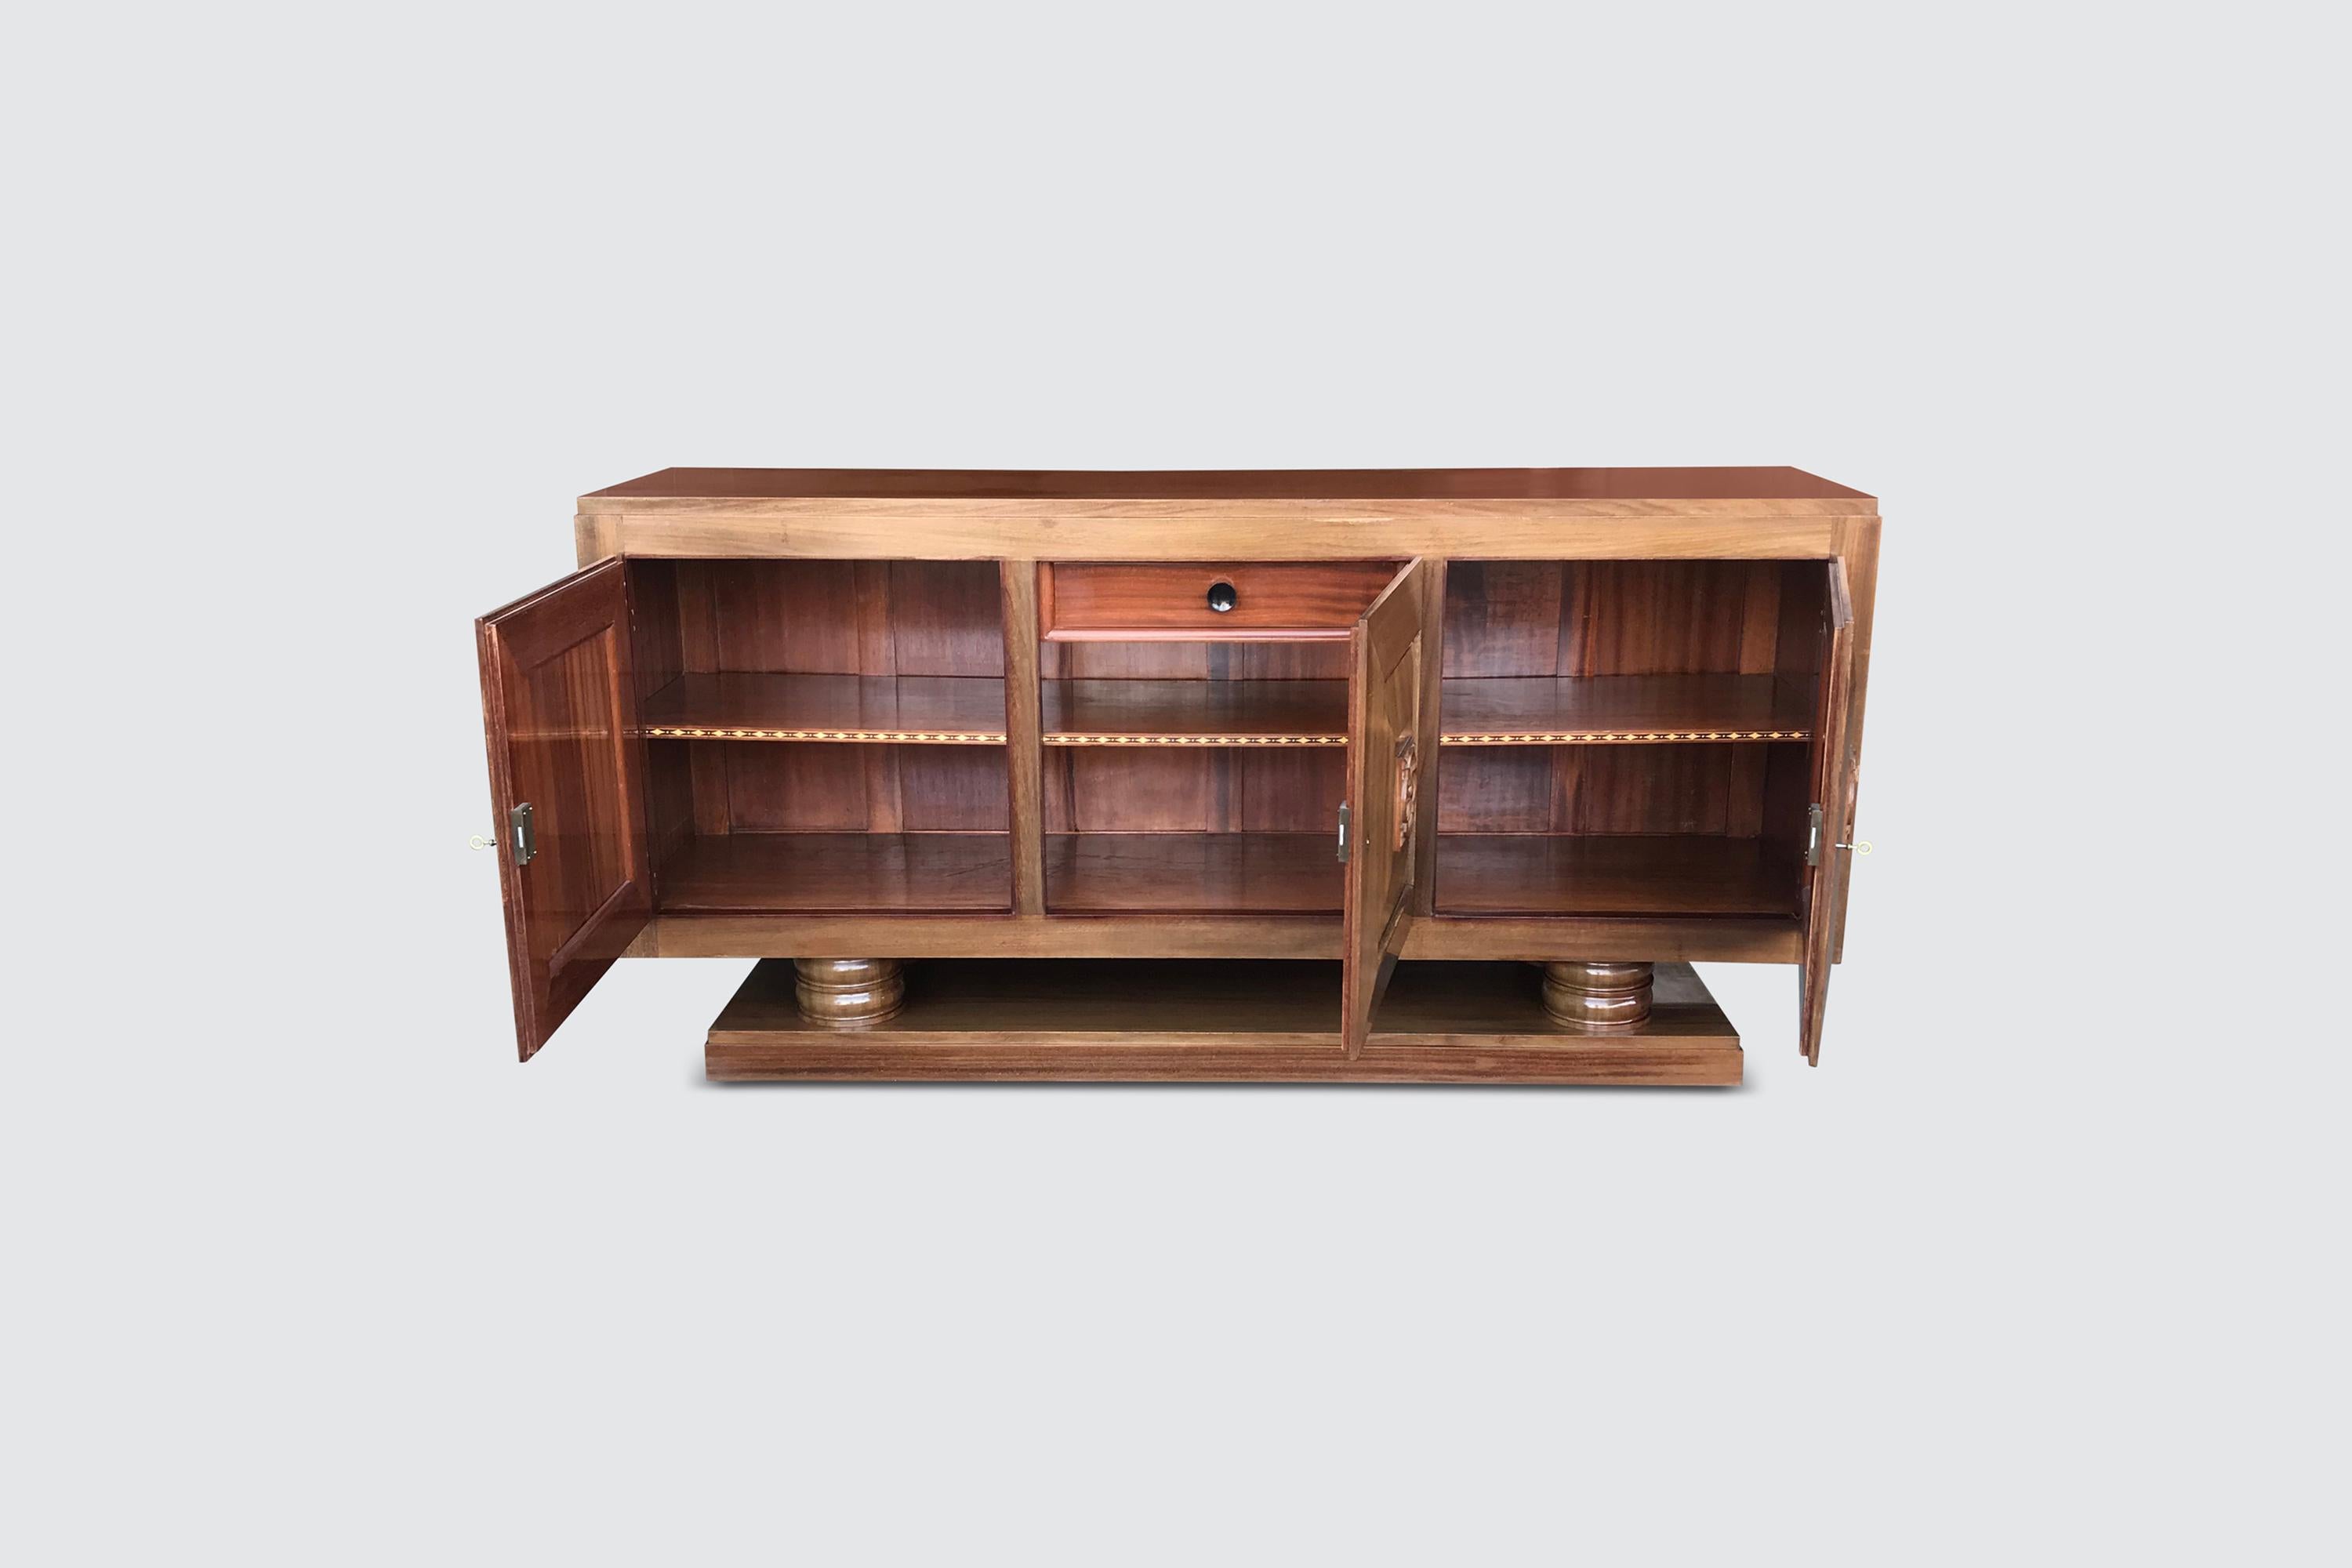 Sculpted Mahogany Art Deco Credenza by Gaston Poisson, France, 1930s For Sale 1